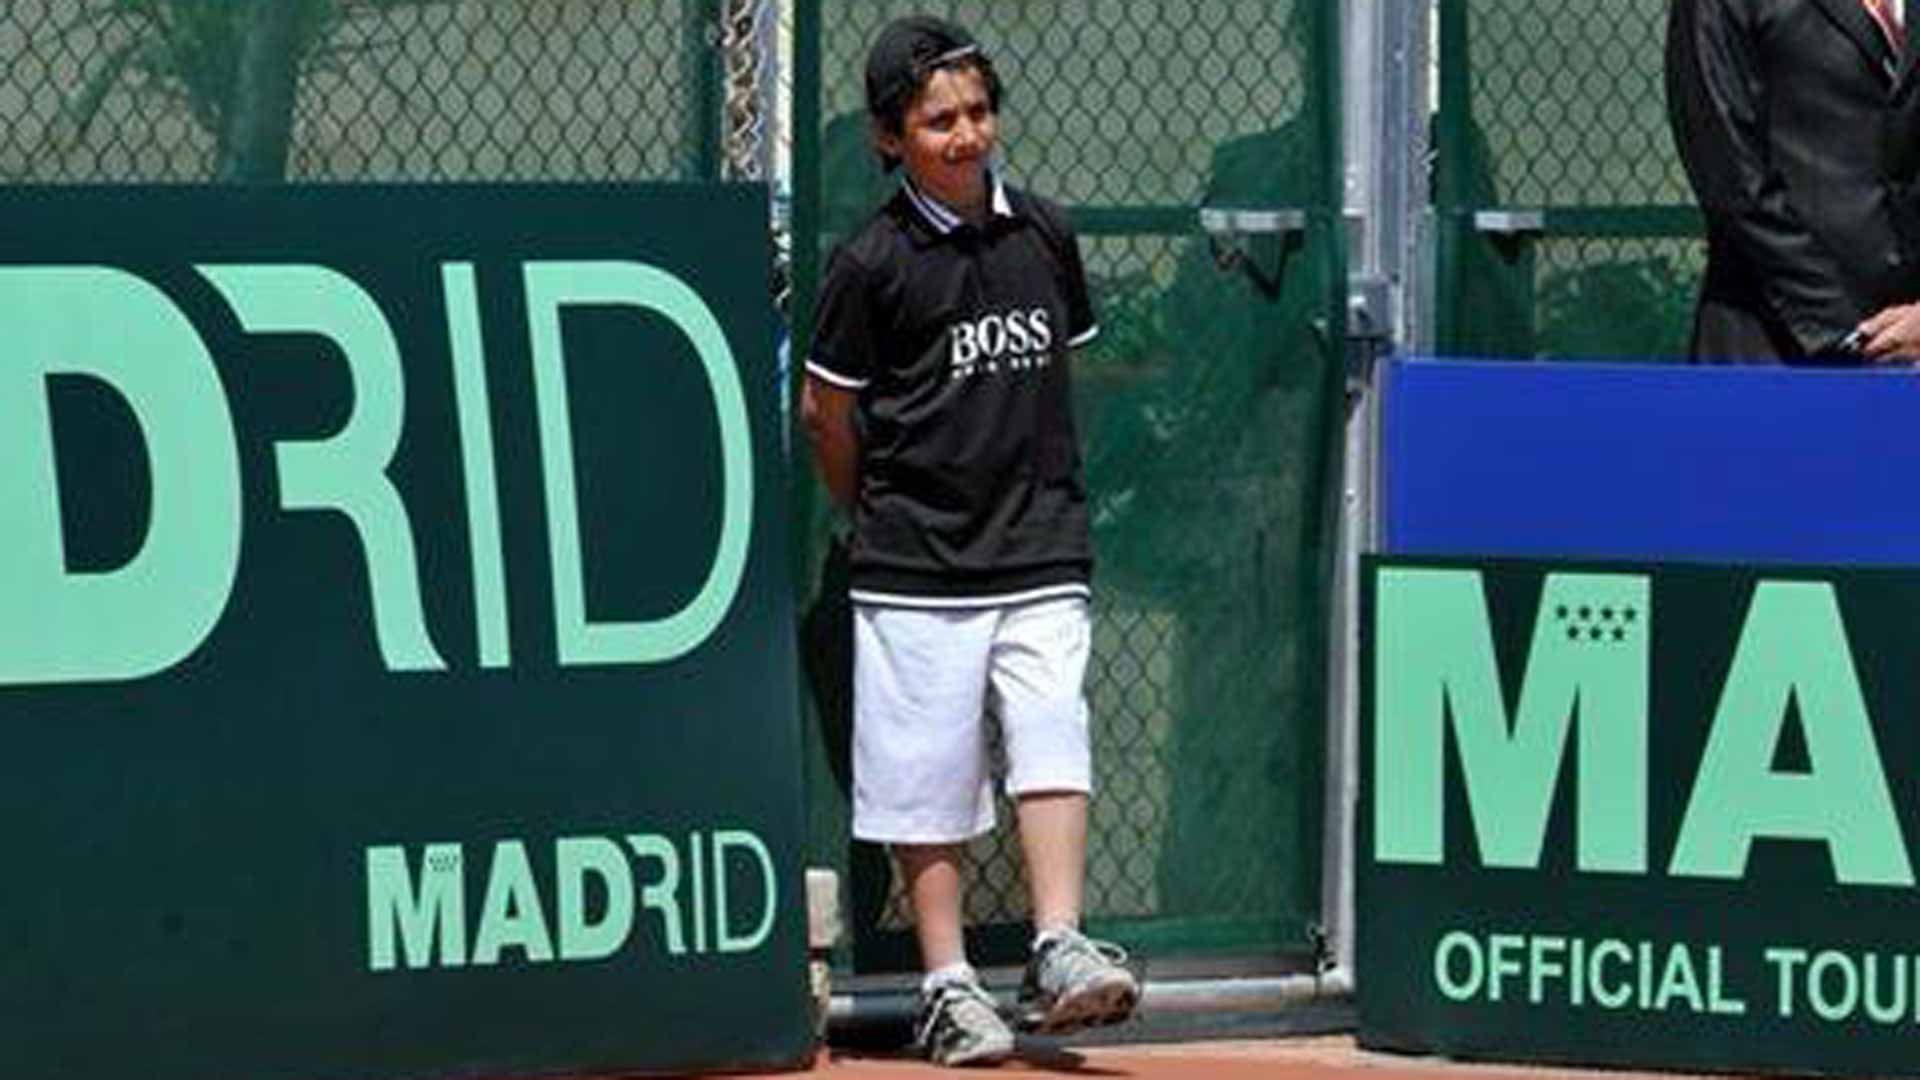 <a href='https://www.atptour.com/en/players/hazem-naw/n0bk/overview'>Hazem Naw</a> as a ballkid at the 2009 Davis Cup Asia/Oceania Zone Group III, which was hosted at the Al-Hamadaniah Tennis Complex.